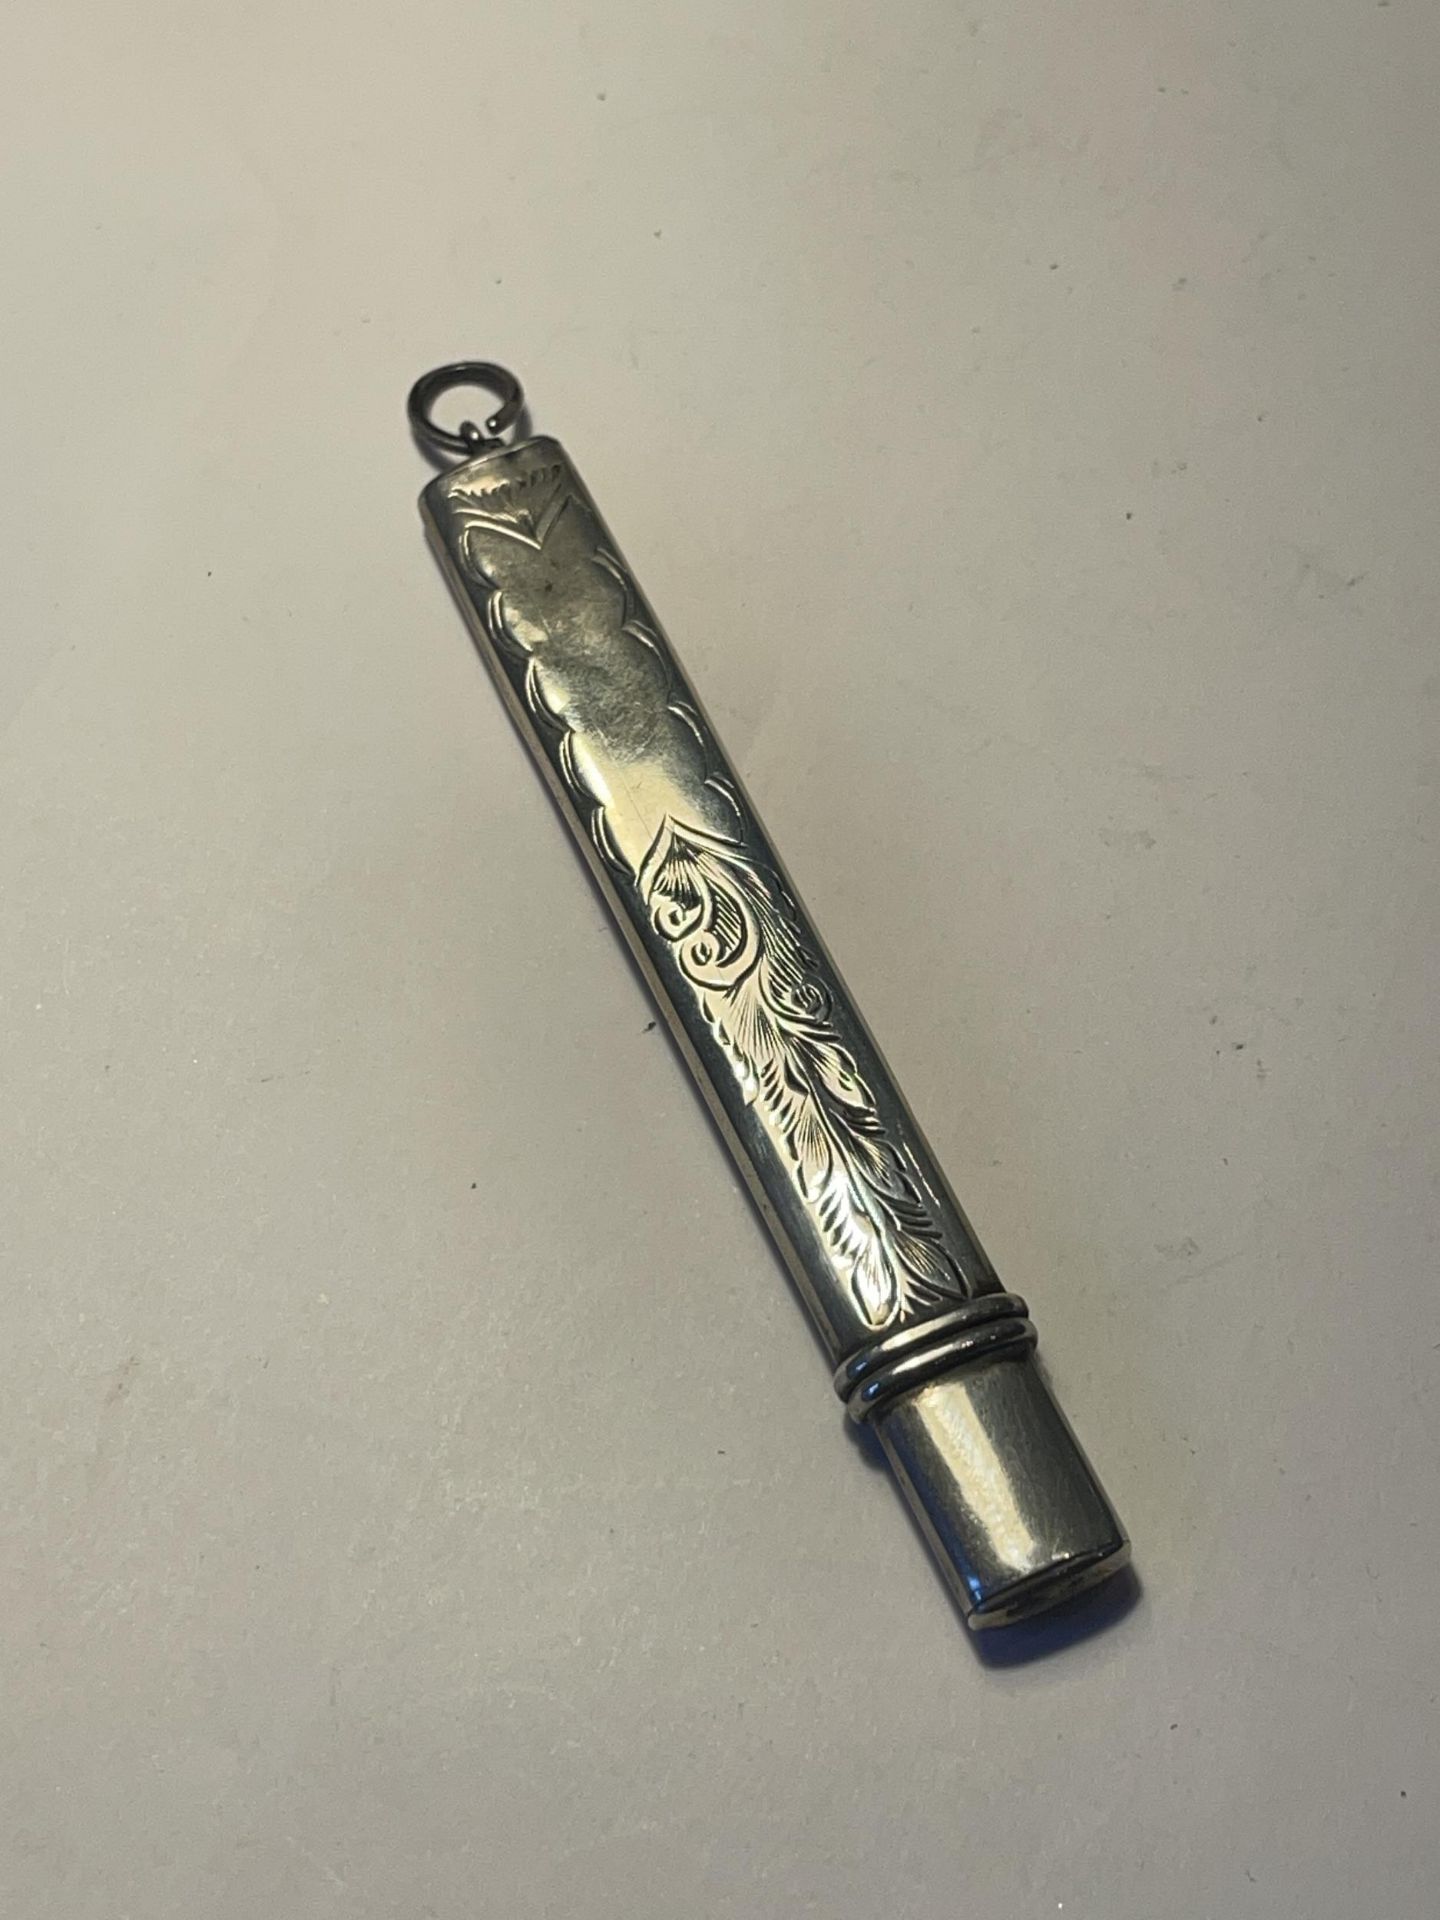 A HALLMARKED CHESTER SILVER PENCIL WITH COVER - Image 2 of 5